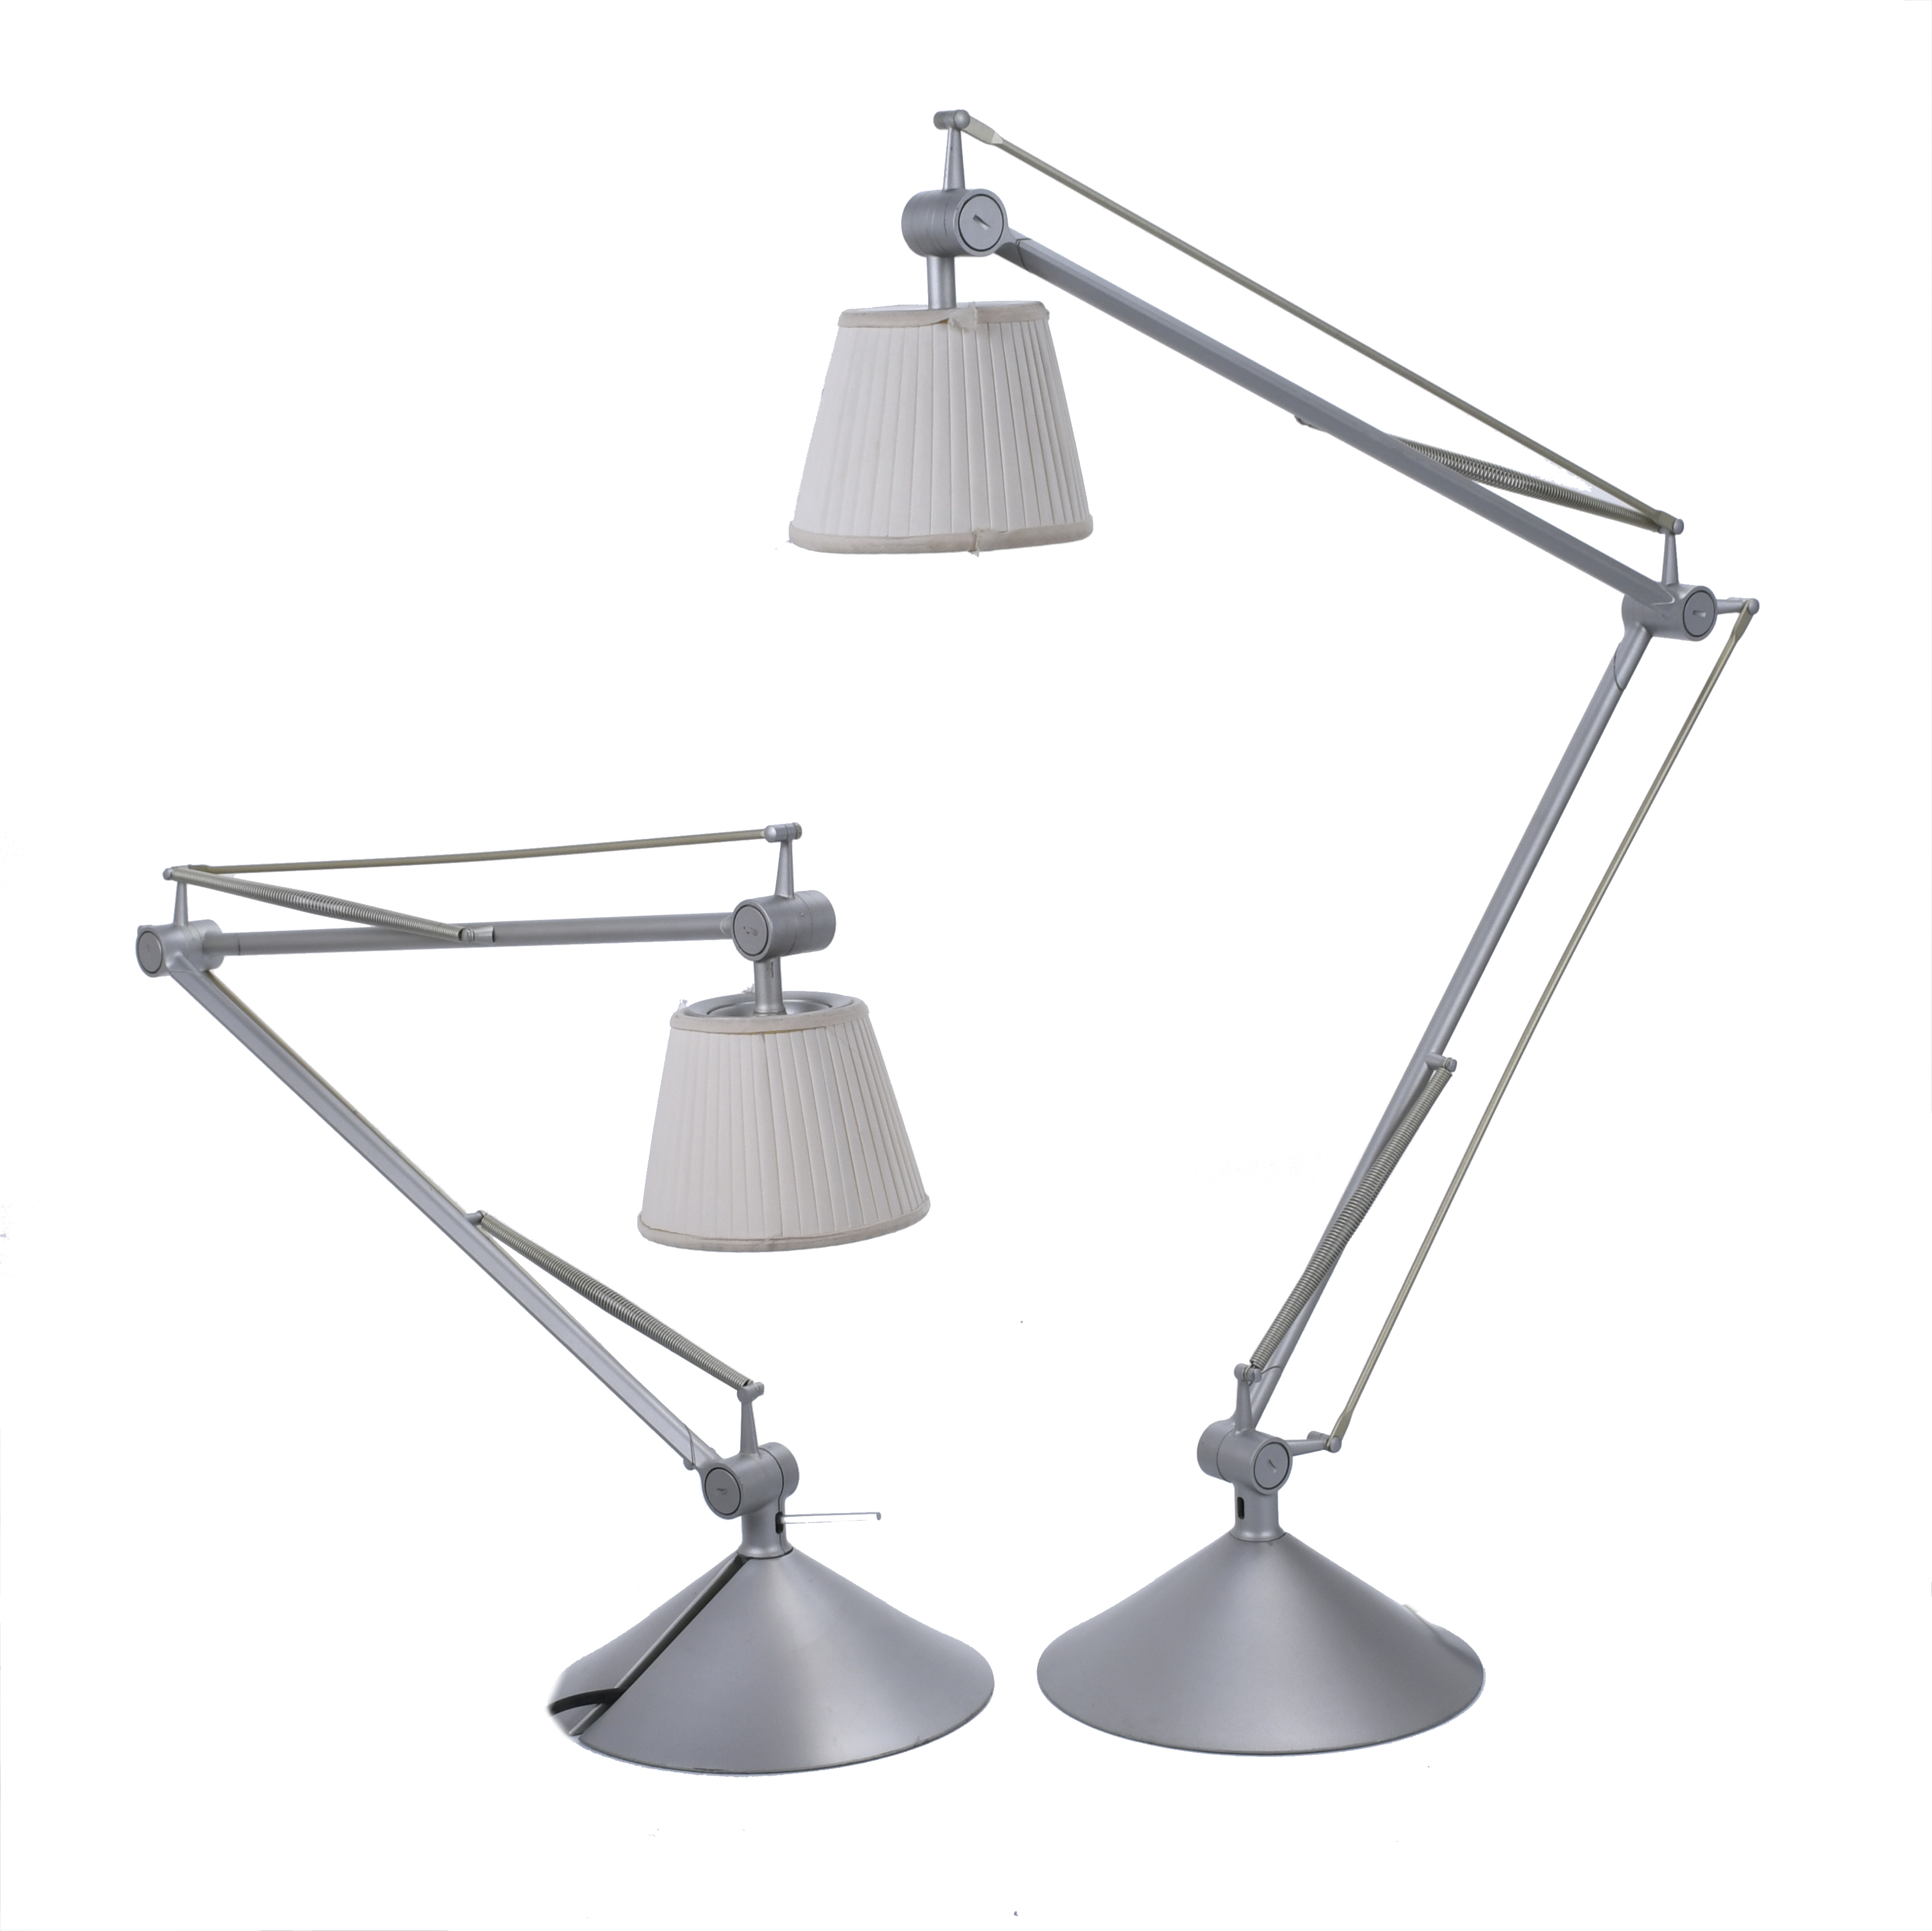 PHILIPPE STARCK (1949) PAIR OF "ARCHIMOON" DESK LAMPS.